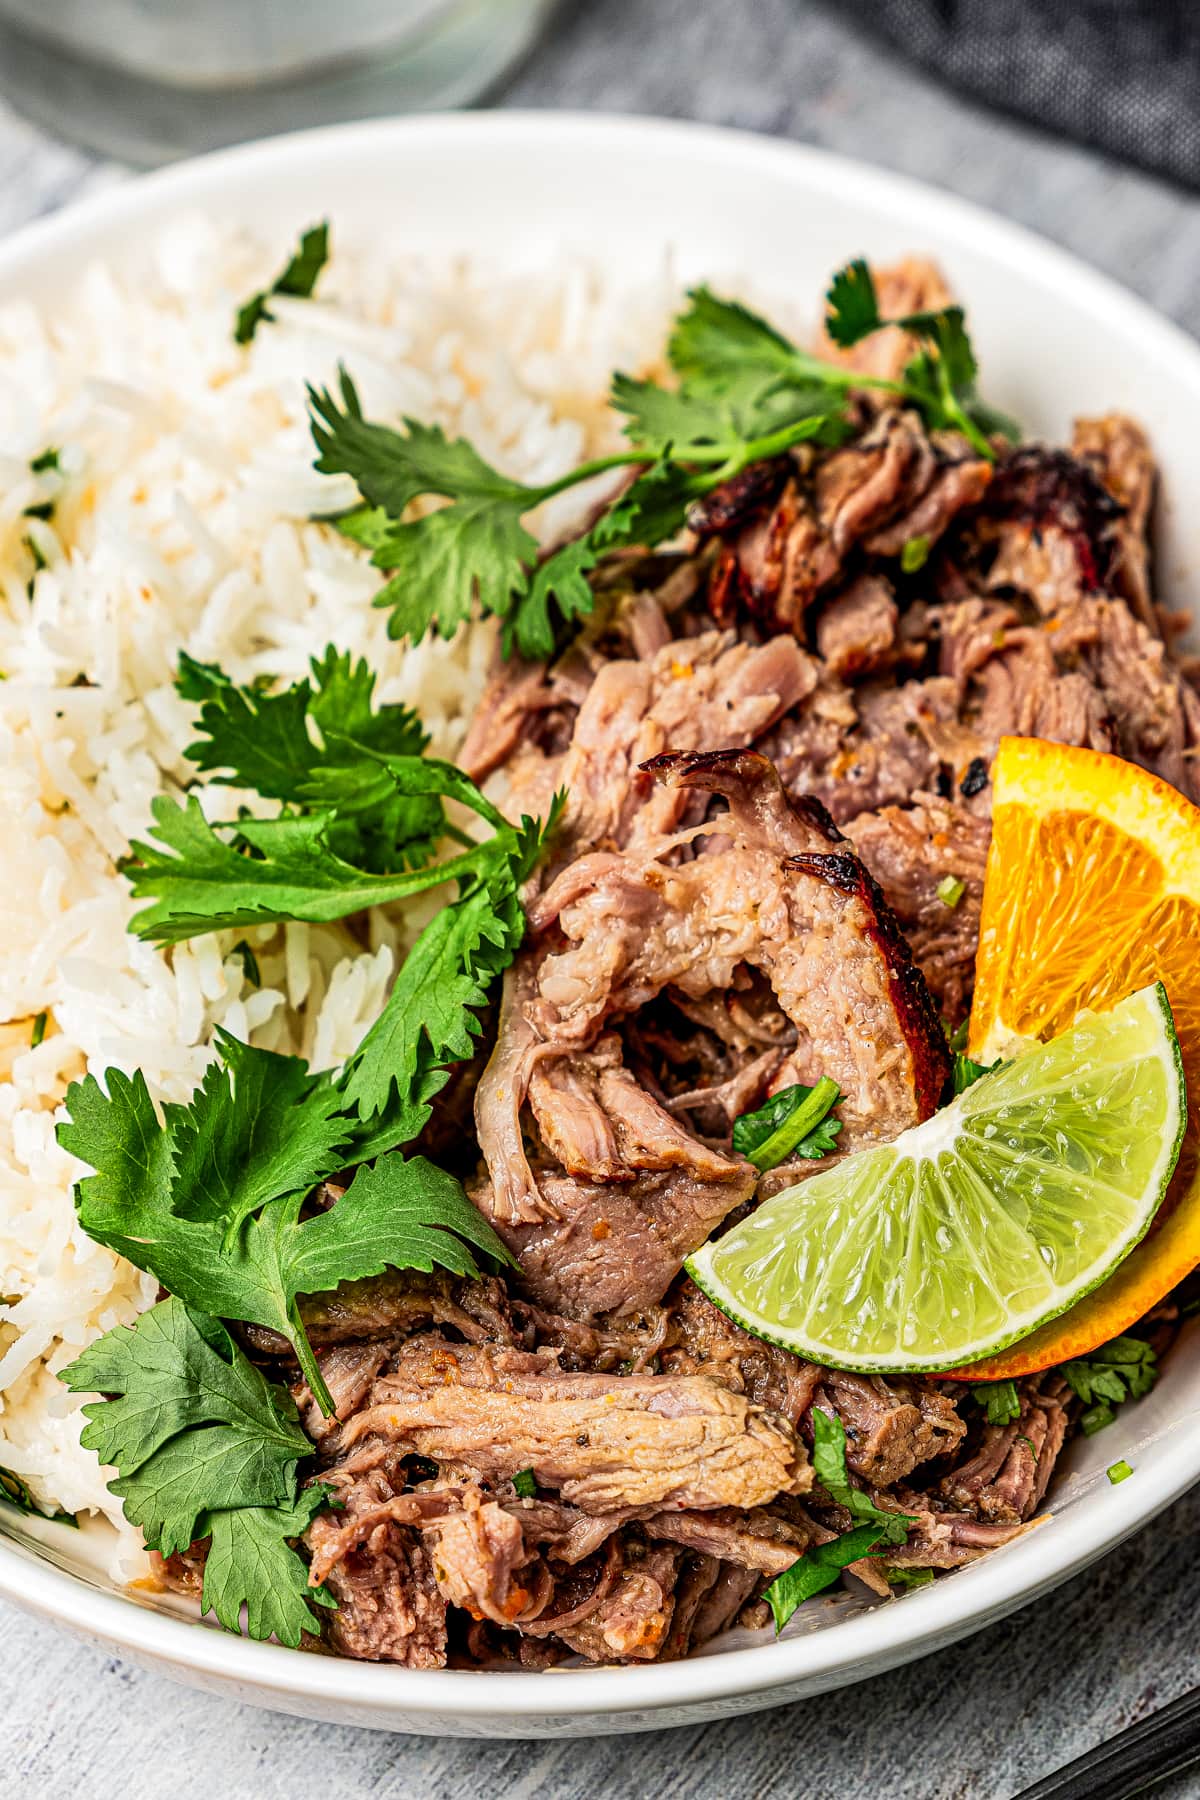 A dinner plate full of rice and shredded pork garnished with cilantro and citrus slices.